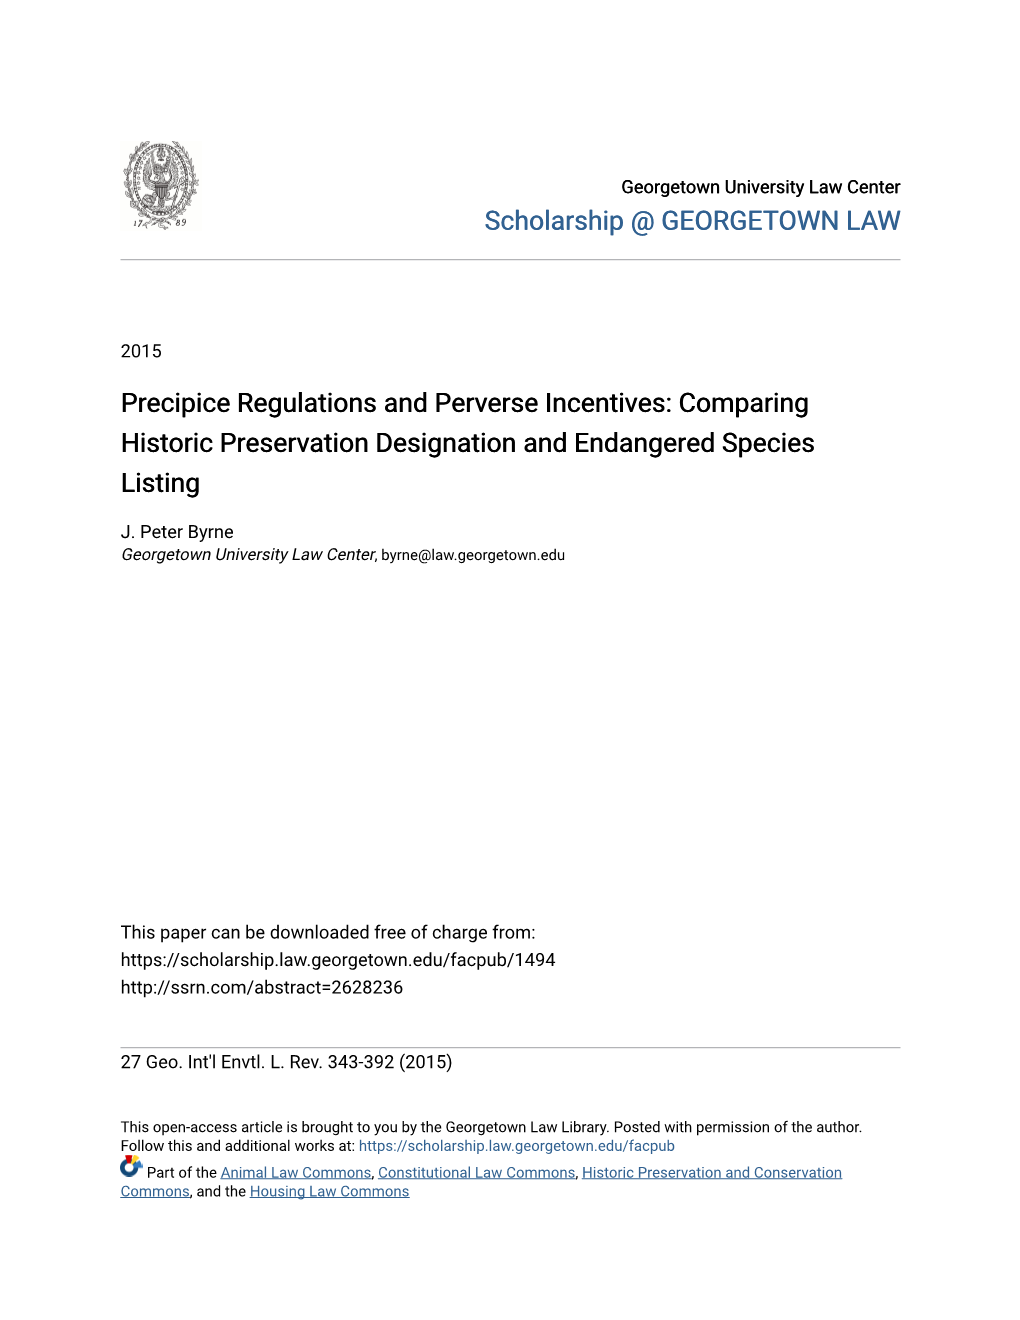 Precipice Regulations and Perverse Incentives: Comparing Historic Preservation Designation and Endangered Species Listing